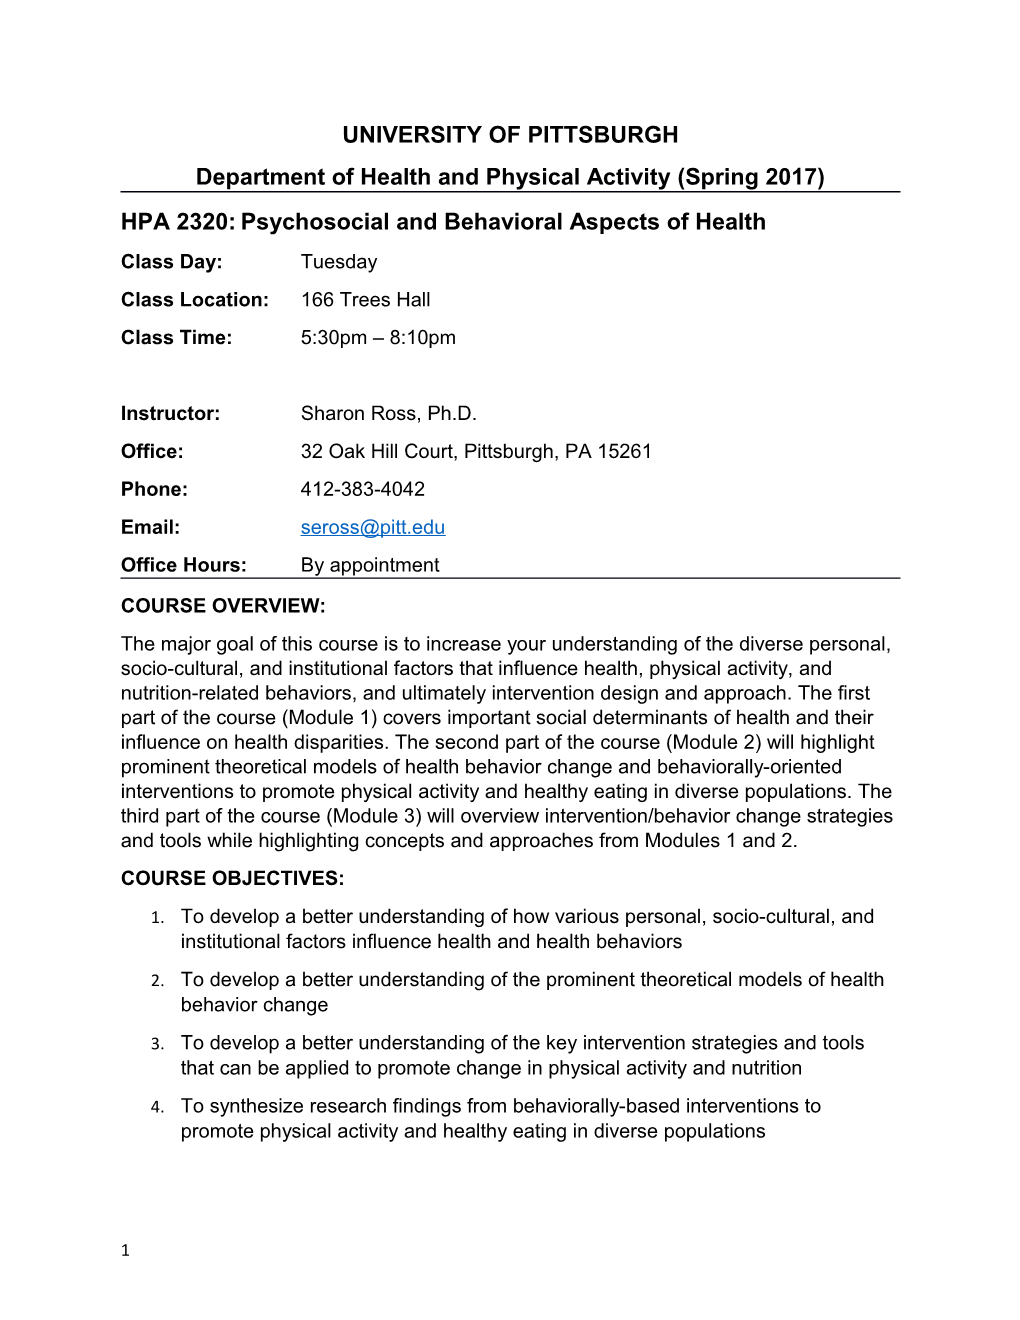 Department of Health and Physical Activity (Spring 2017)